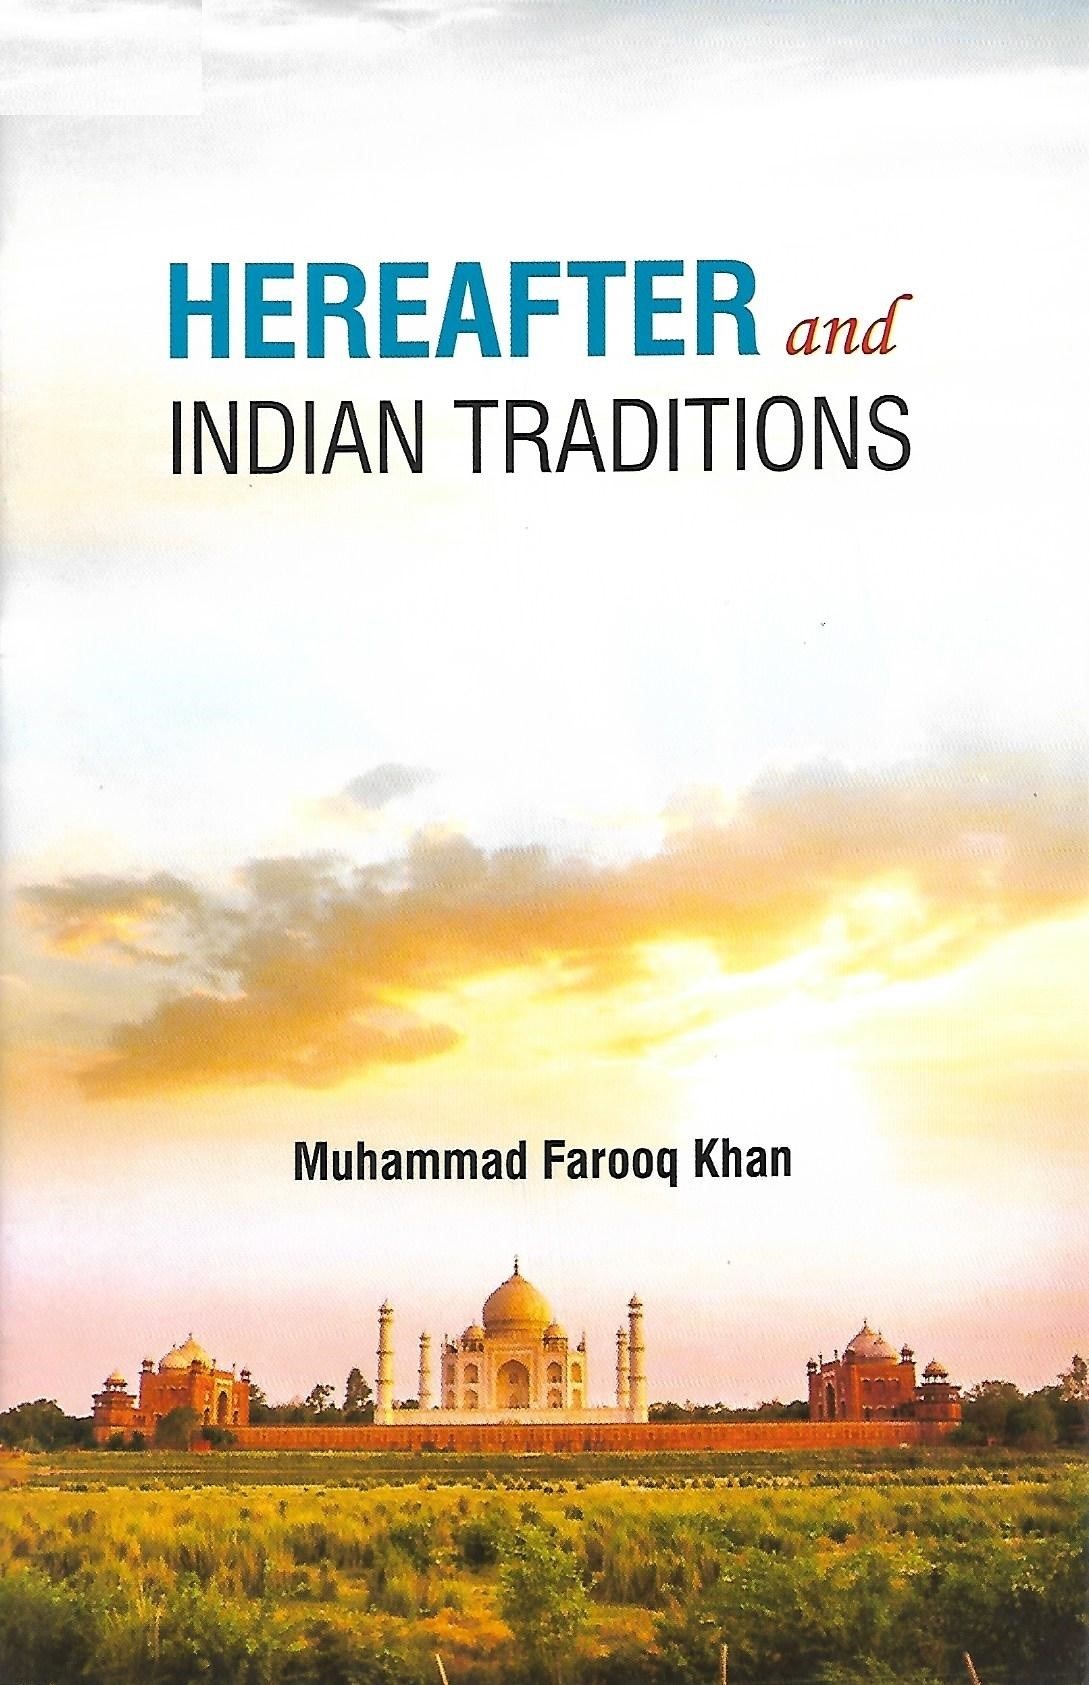 Hereafter and Indian Traditions